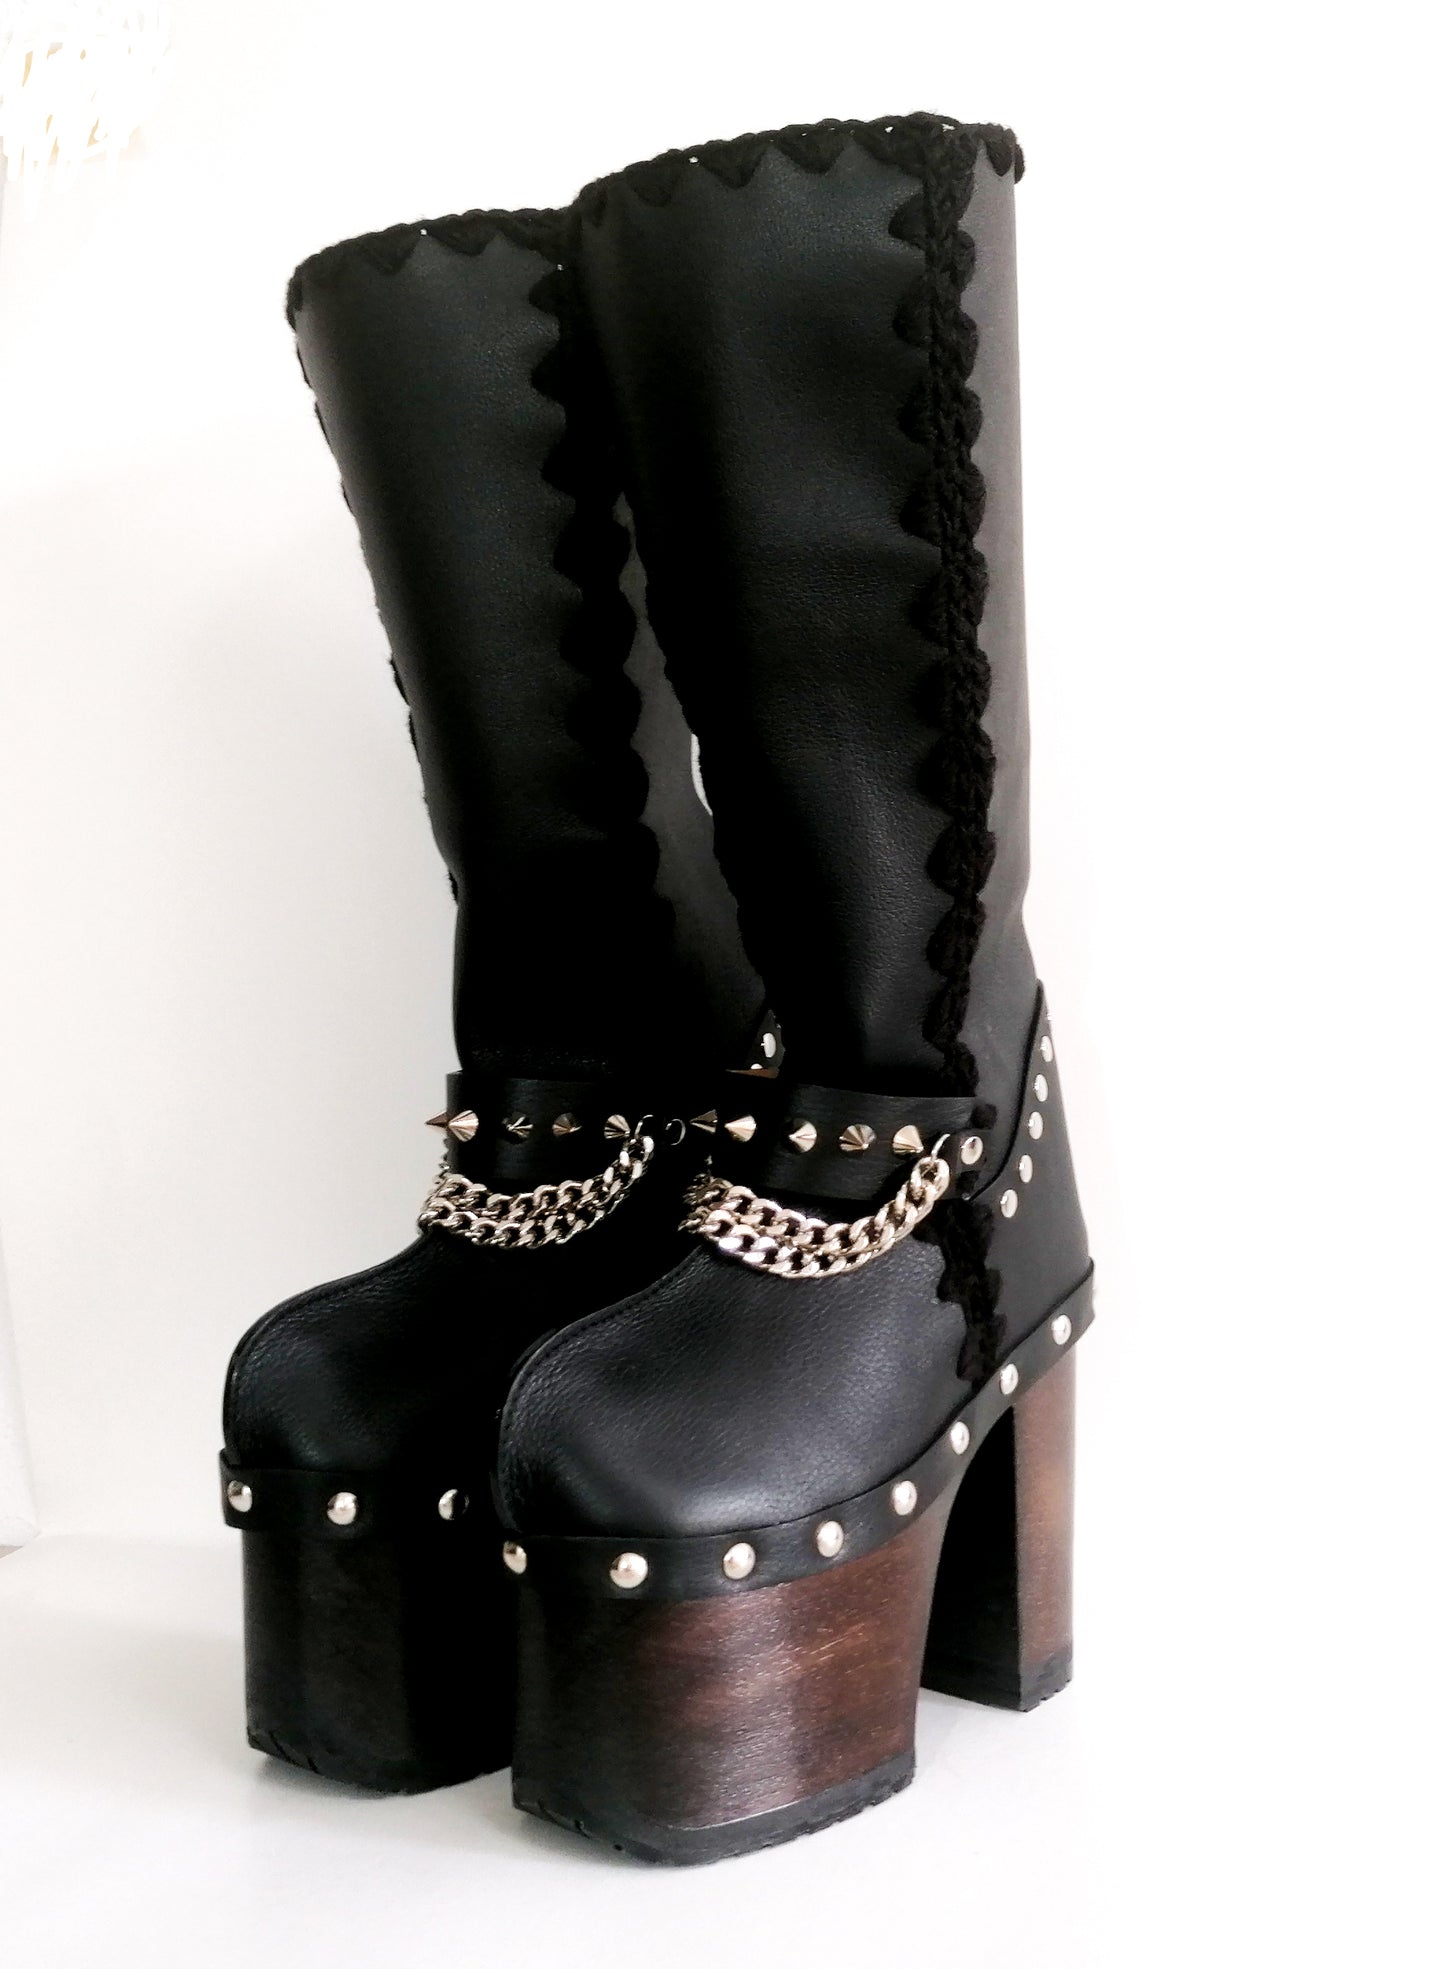 Super high heel platform boots. Black leather boots with studs and silver chains. Super high wooden heel. Sizes 34 to 47. High quality handmade leather shoes.